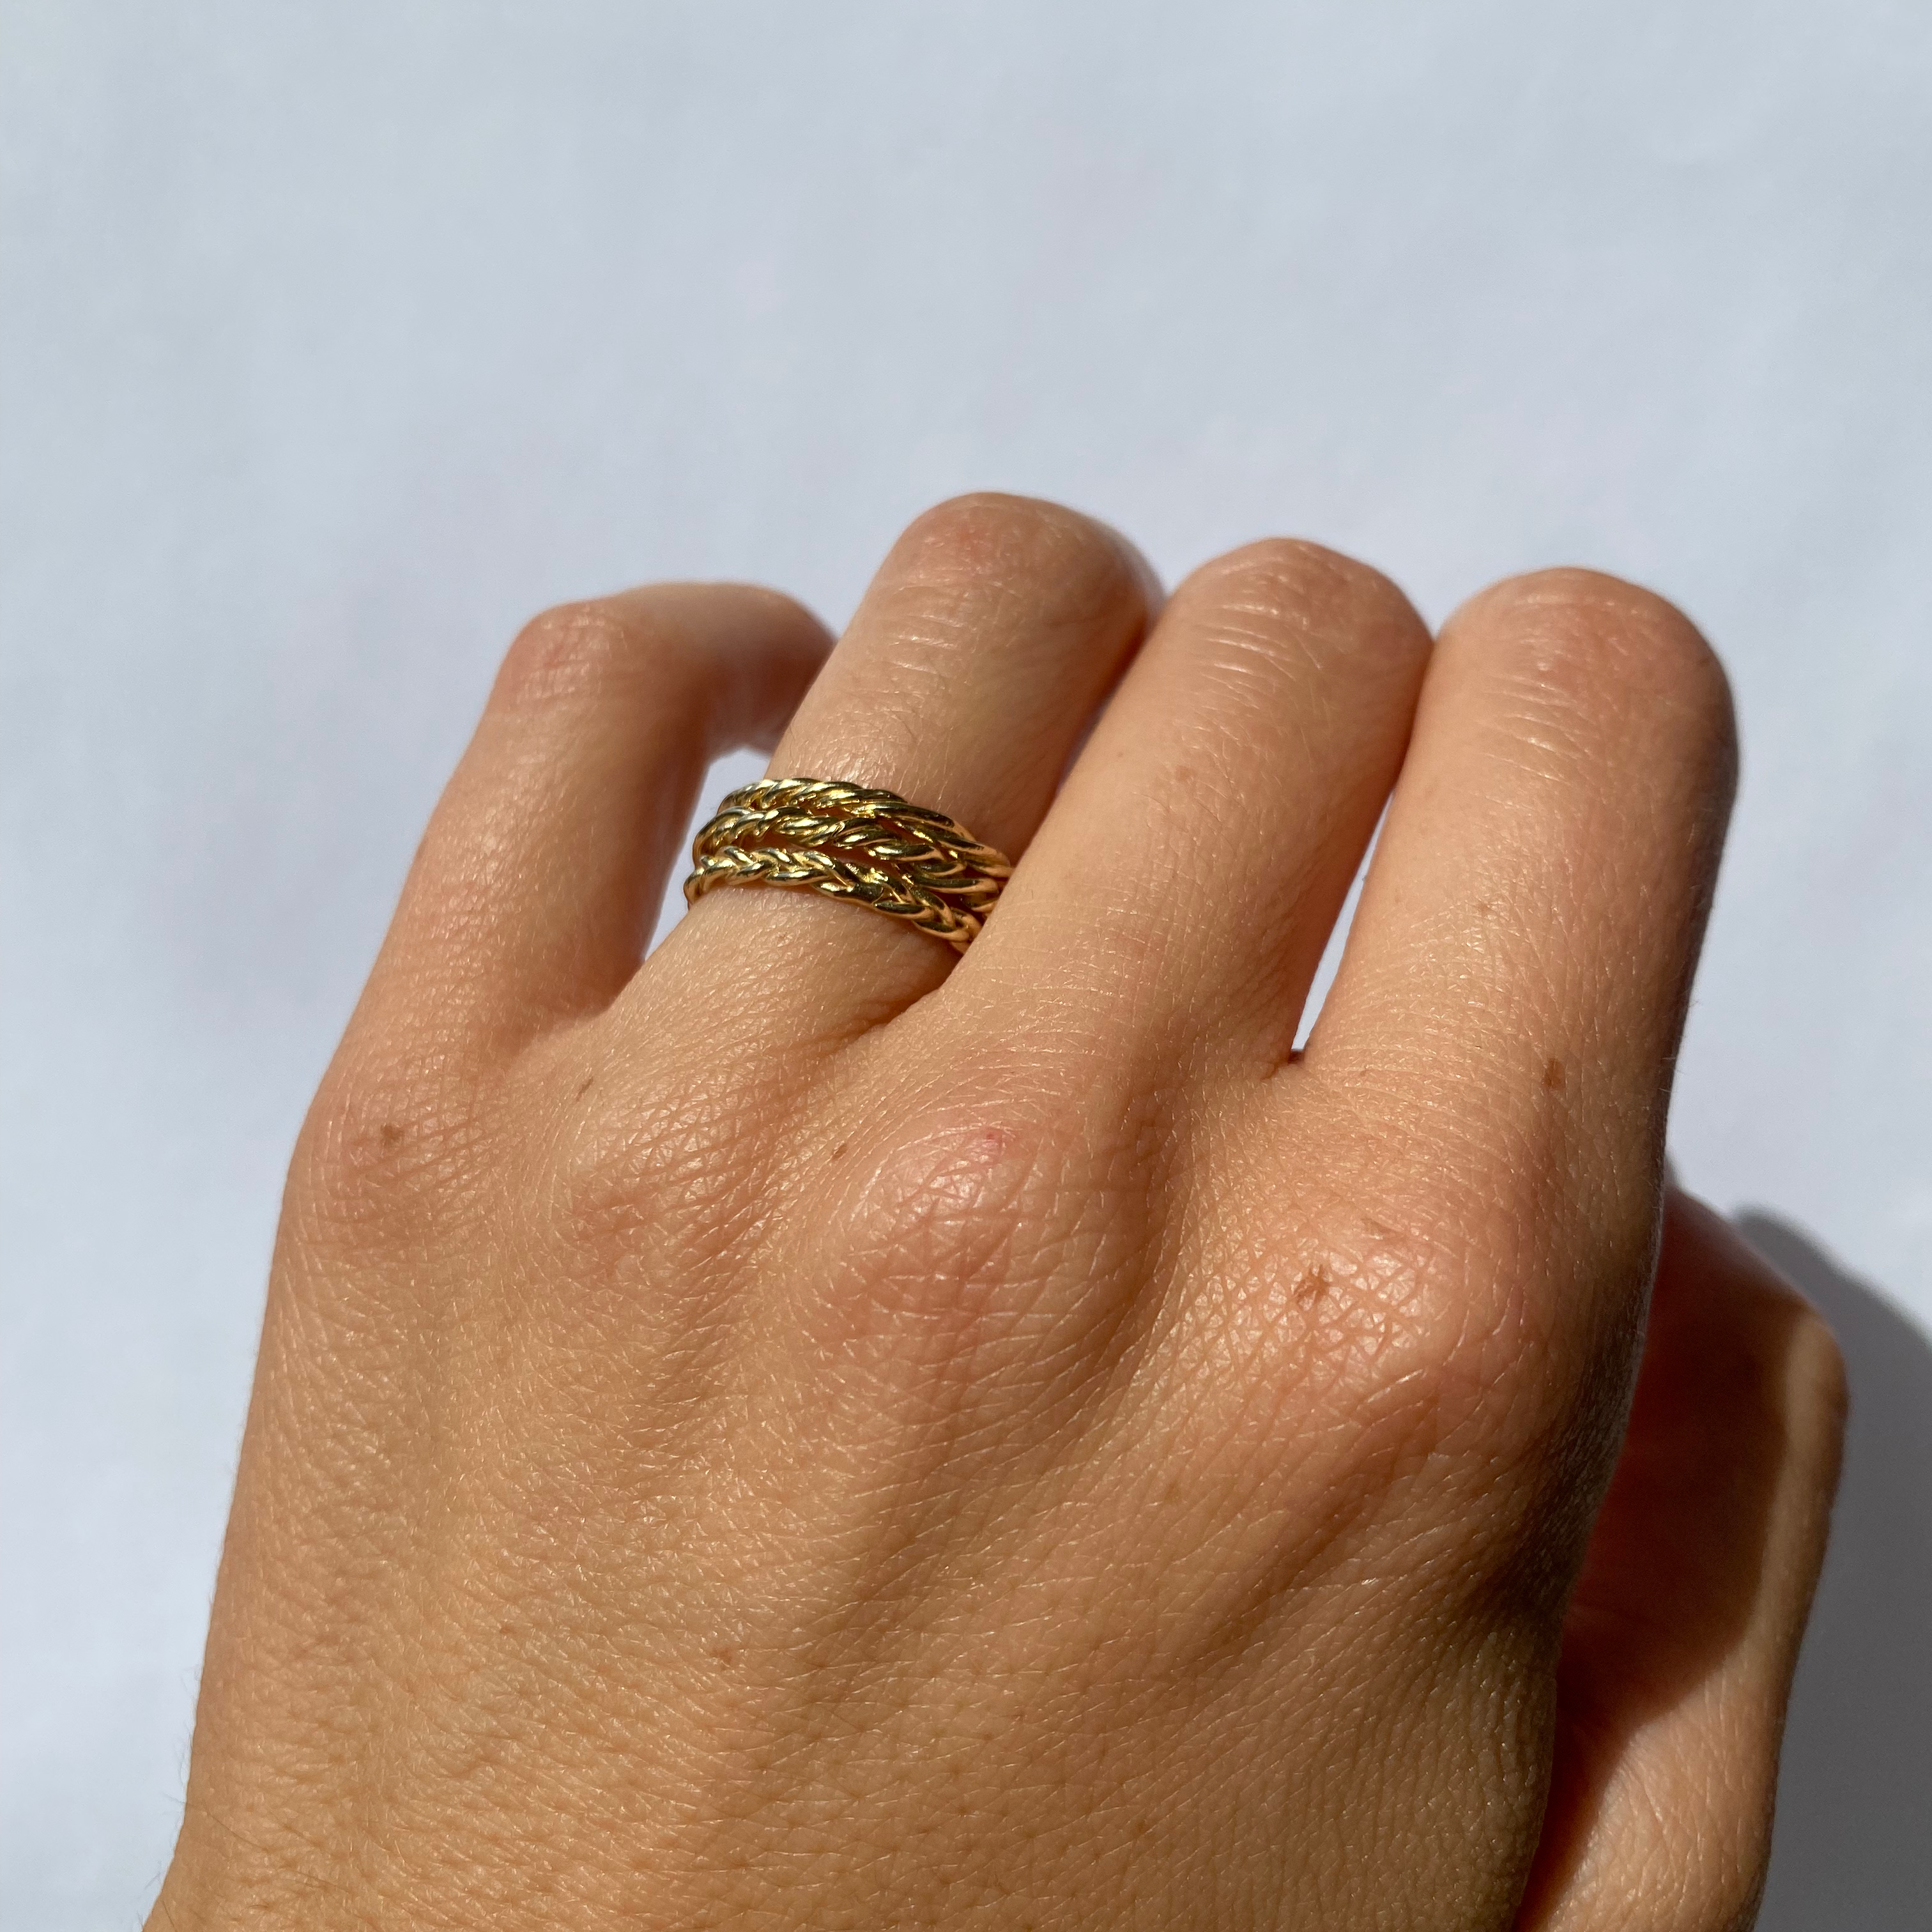 Infinitum Stack / Ring III By Alfonzo in rings Category